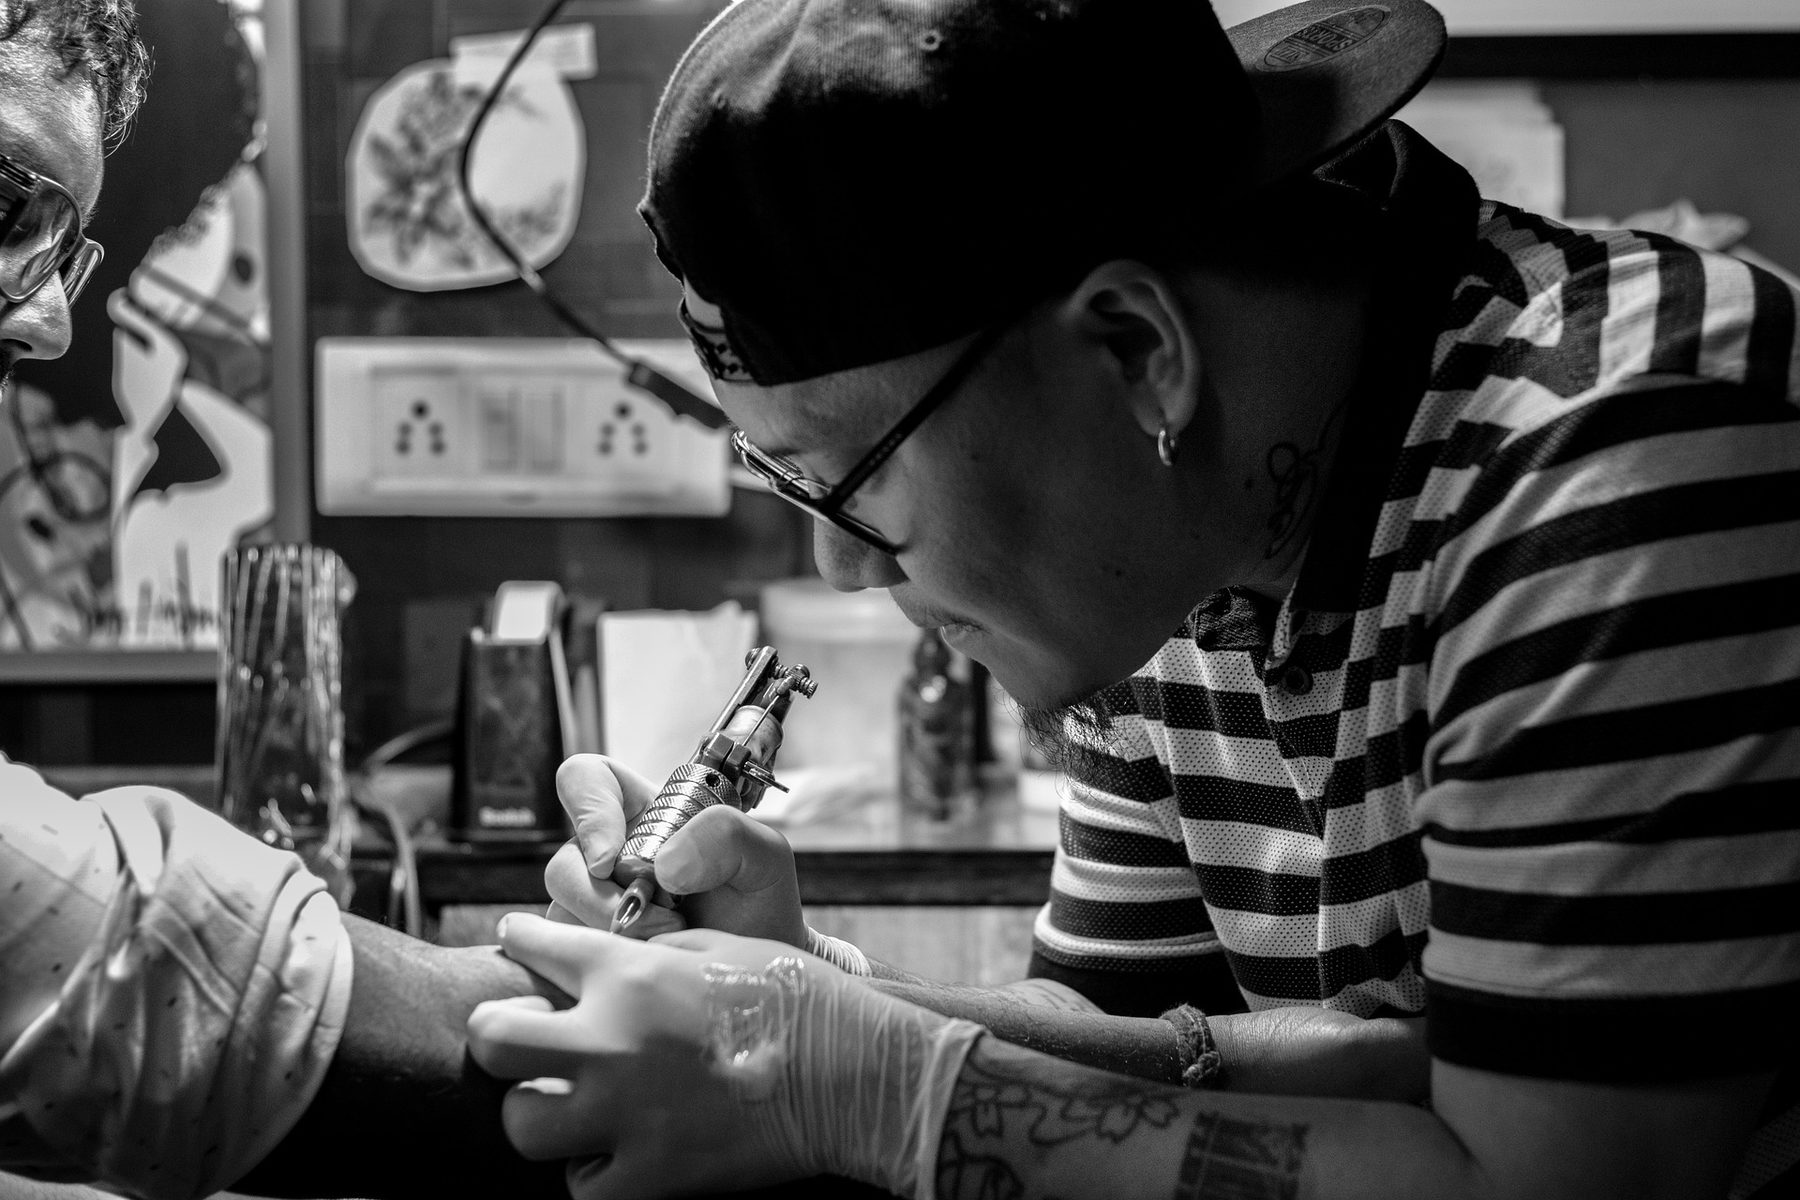 Job Role Image (Tattooist and customer, black and white)